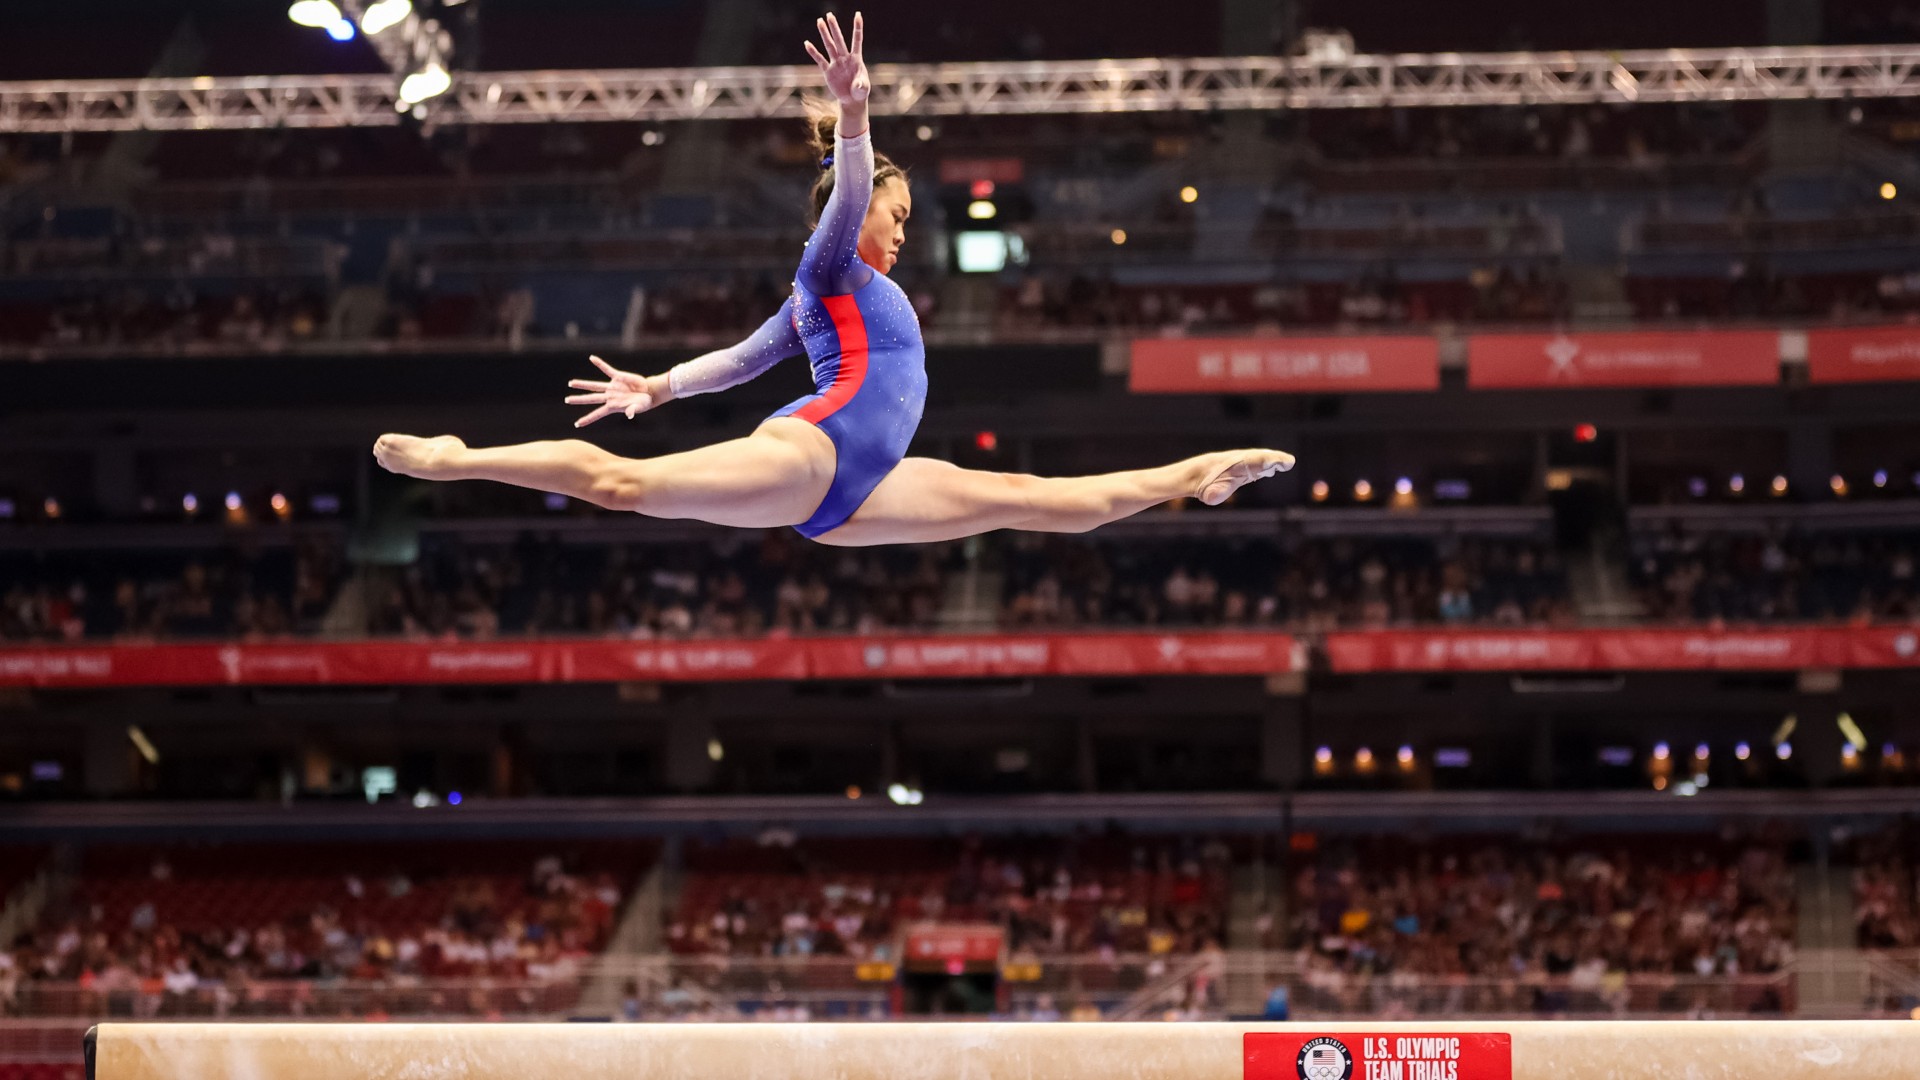 USA Olympic gymnastics team 2021 Meet the full women's roster — led by